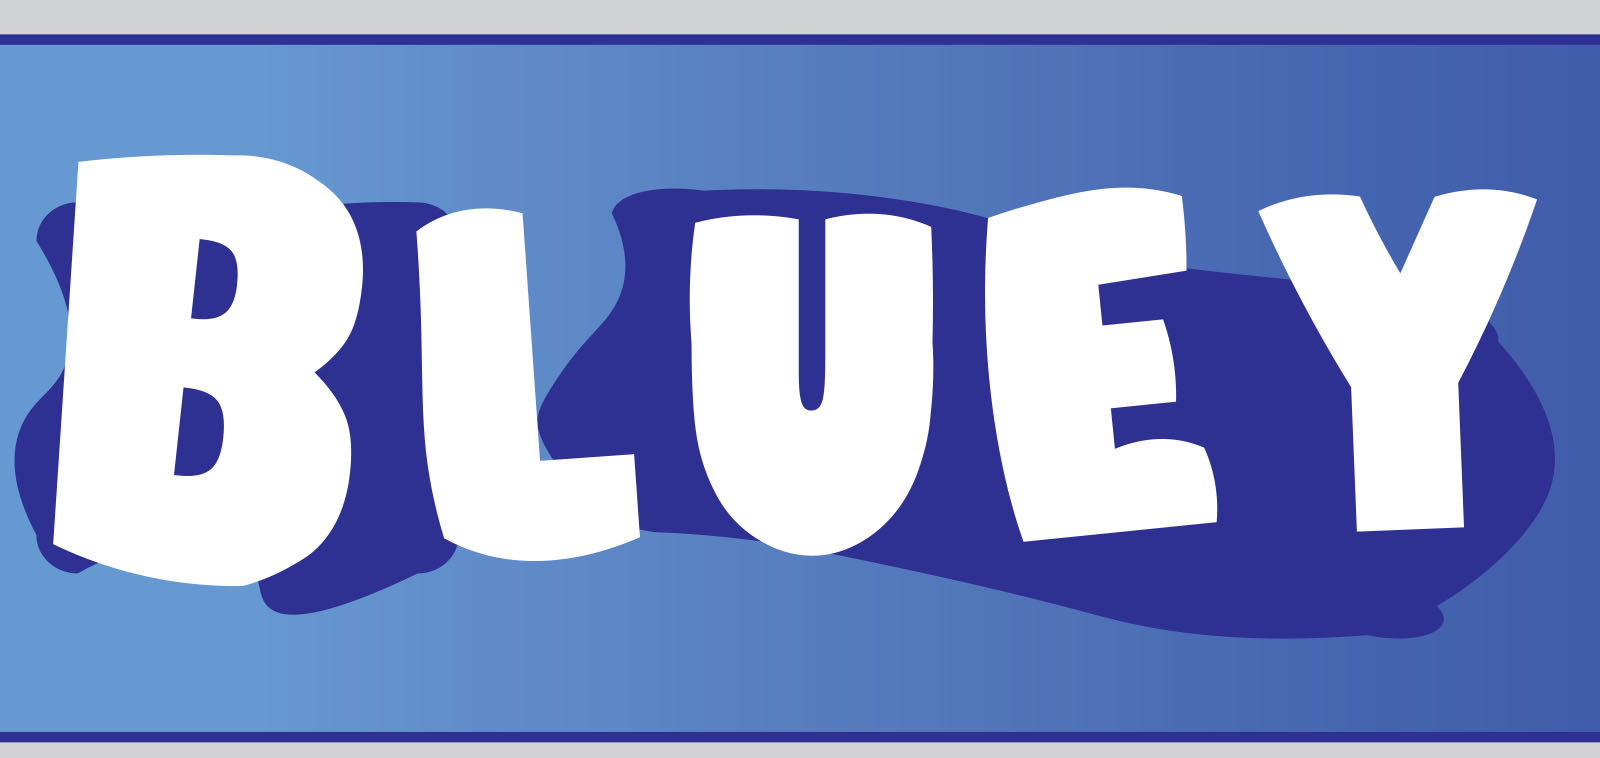 Bluey written in white letters on a blue background